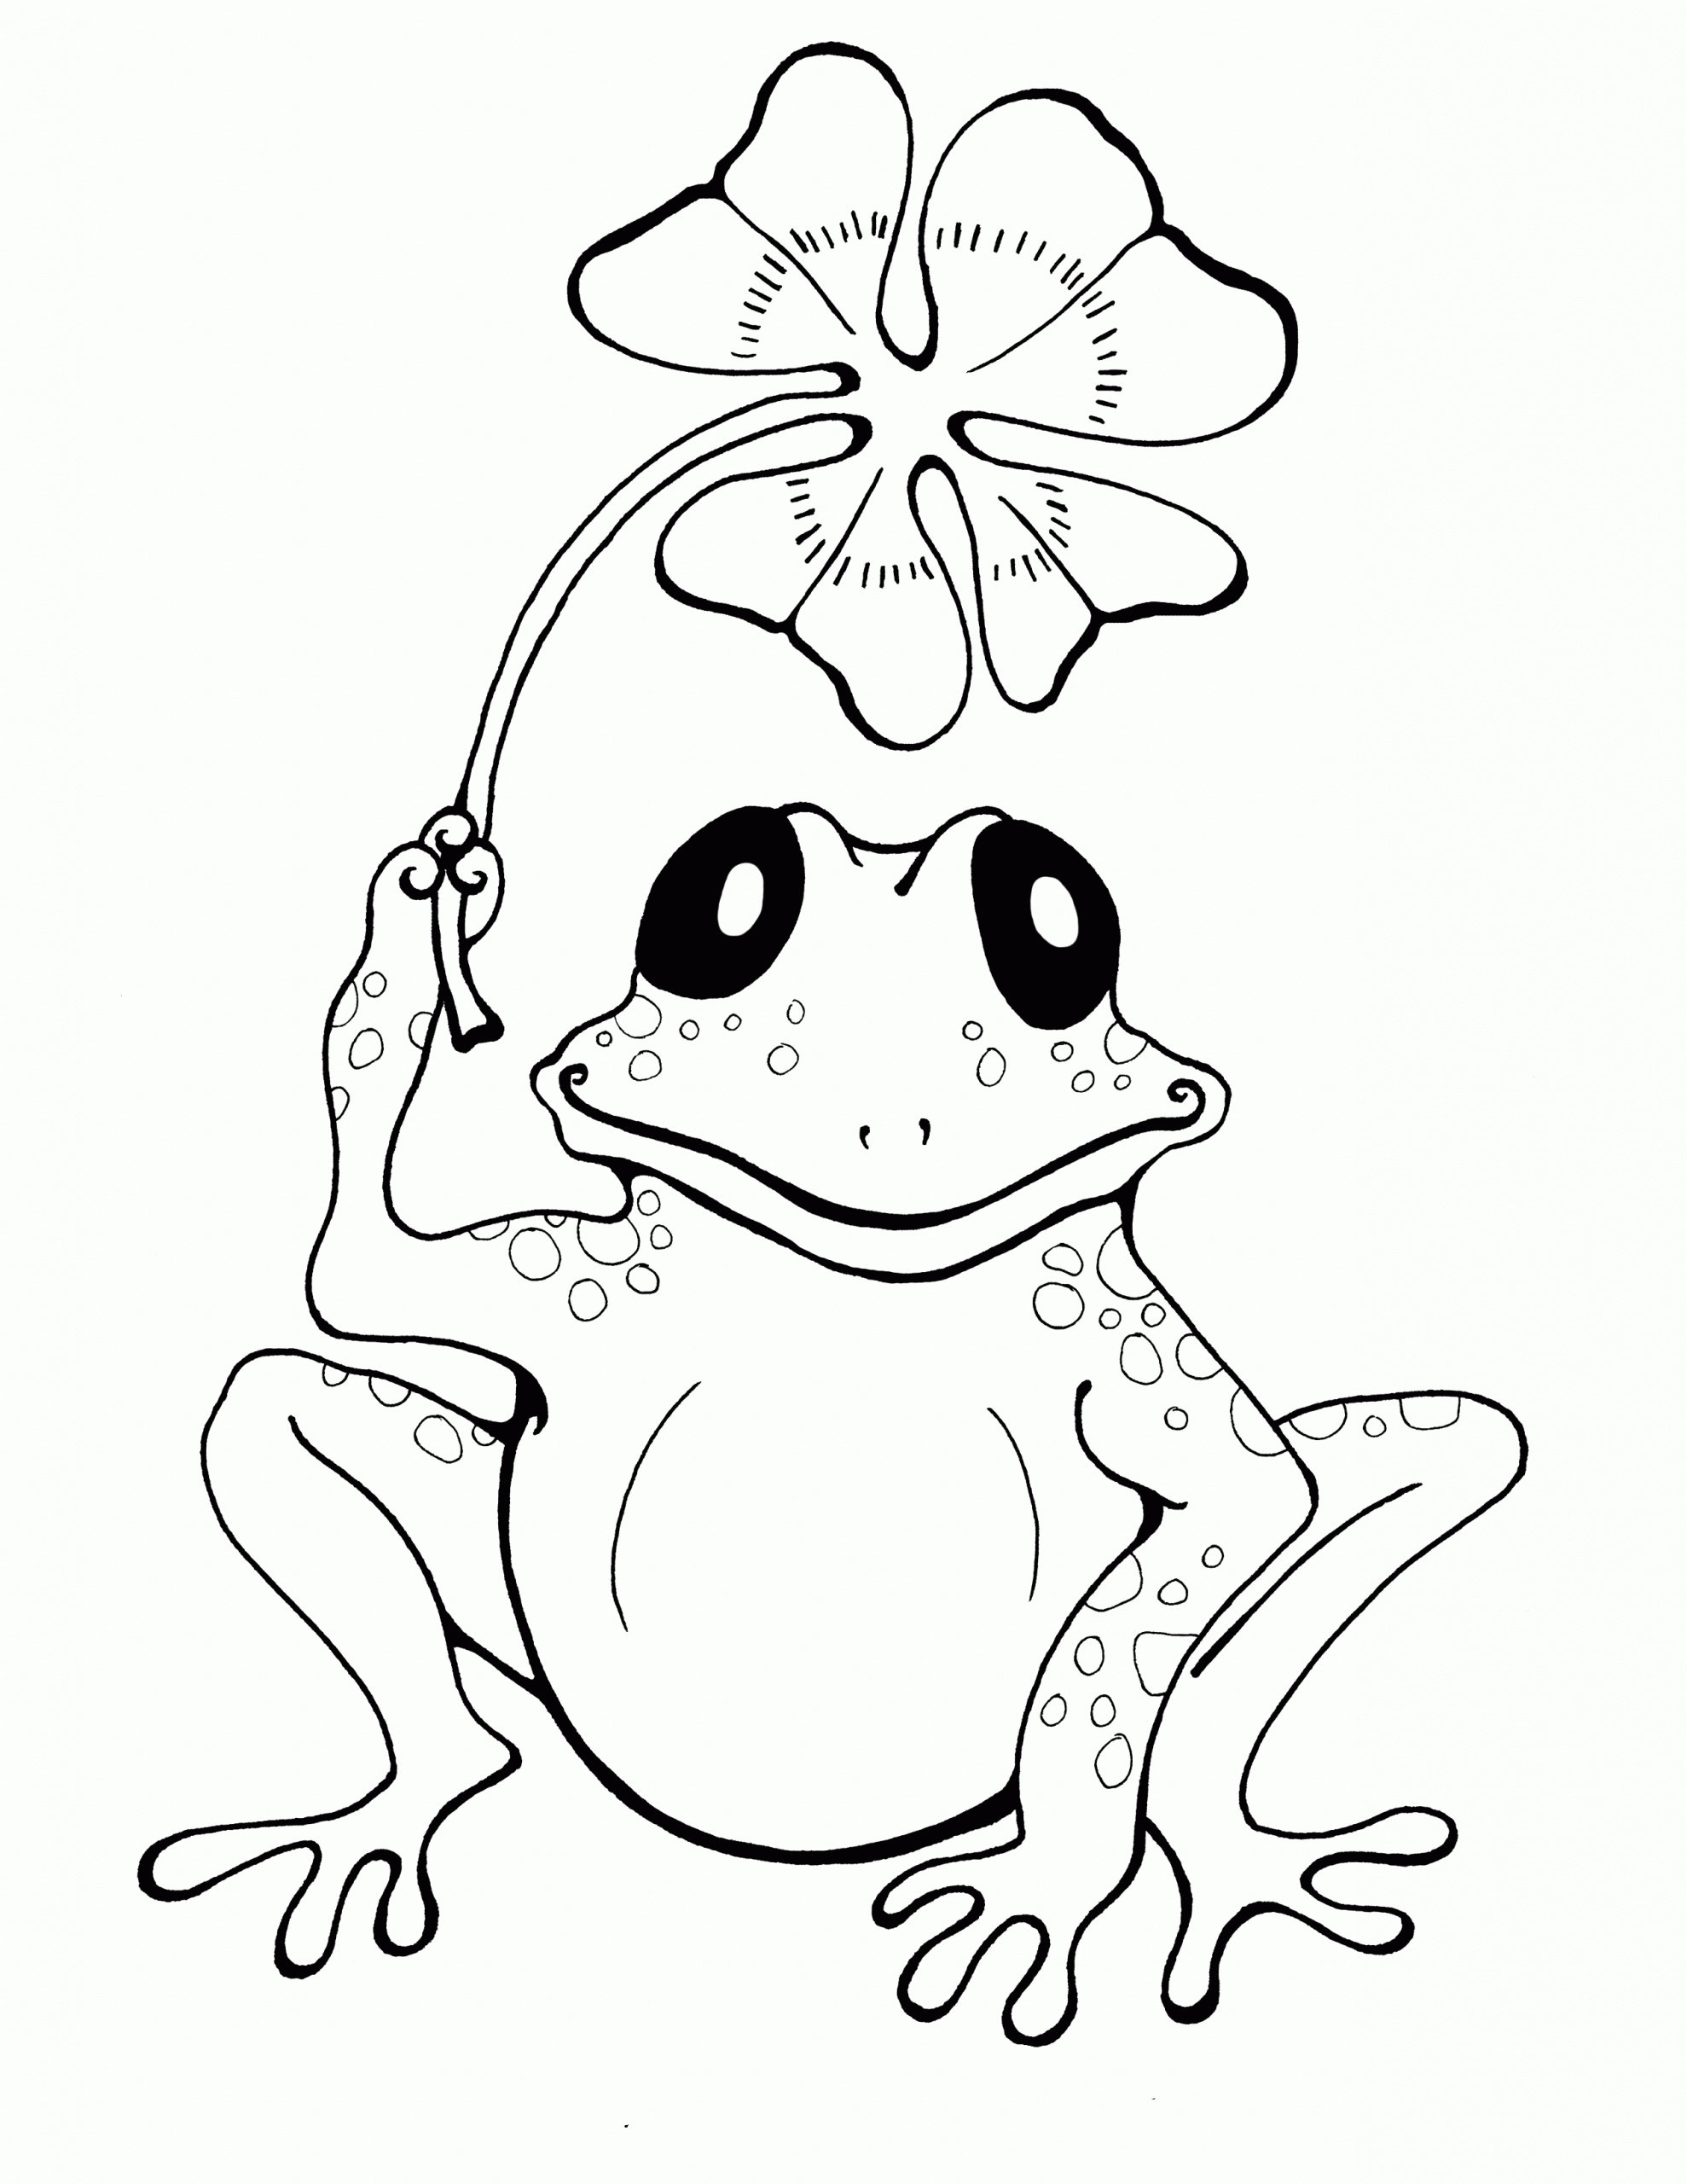 Toad 3 Coloring Page